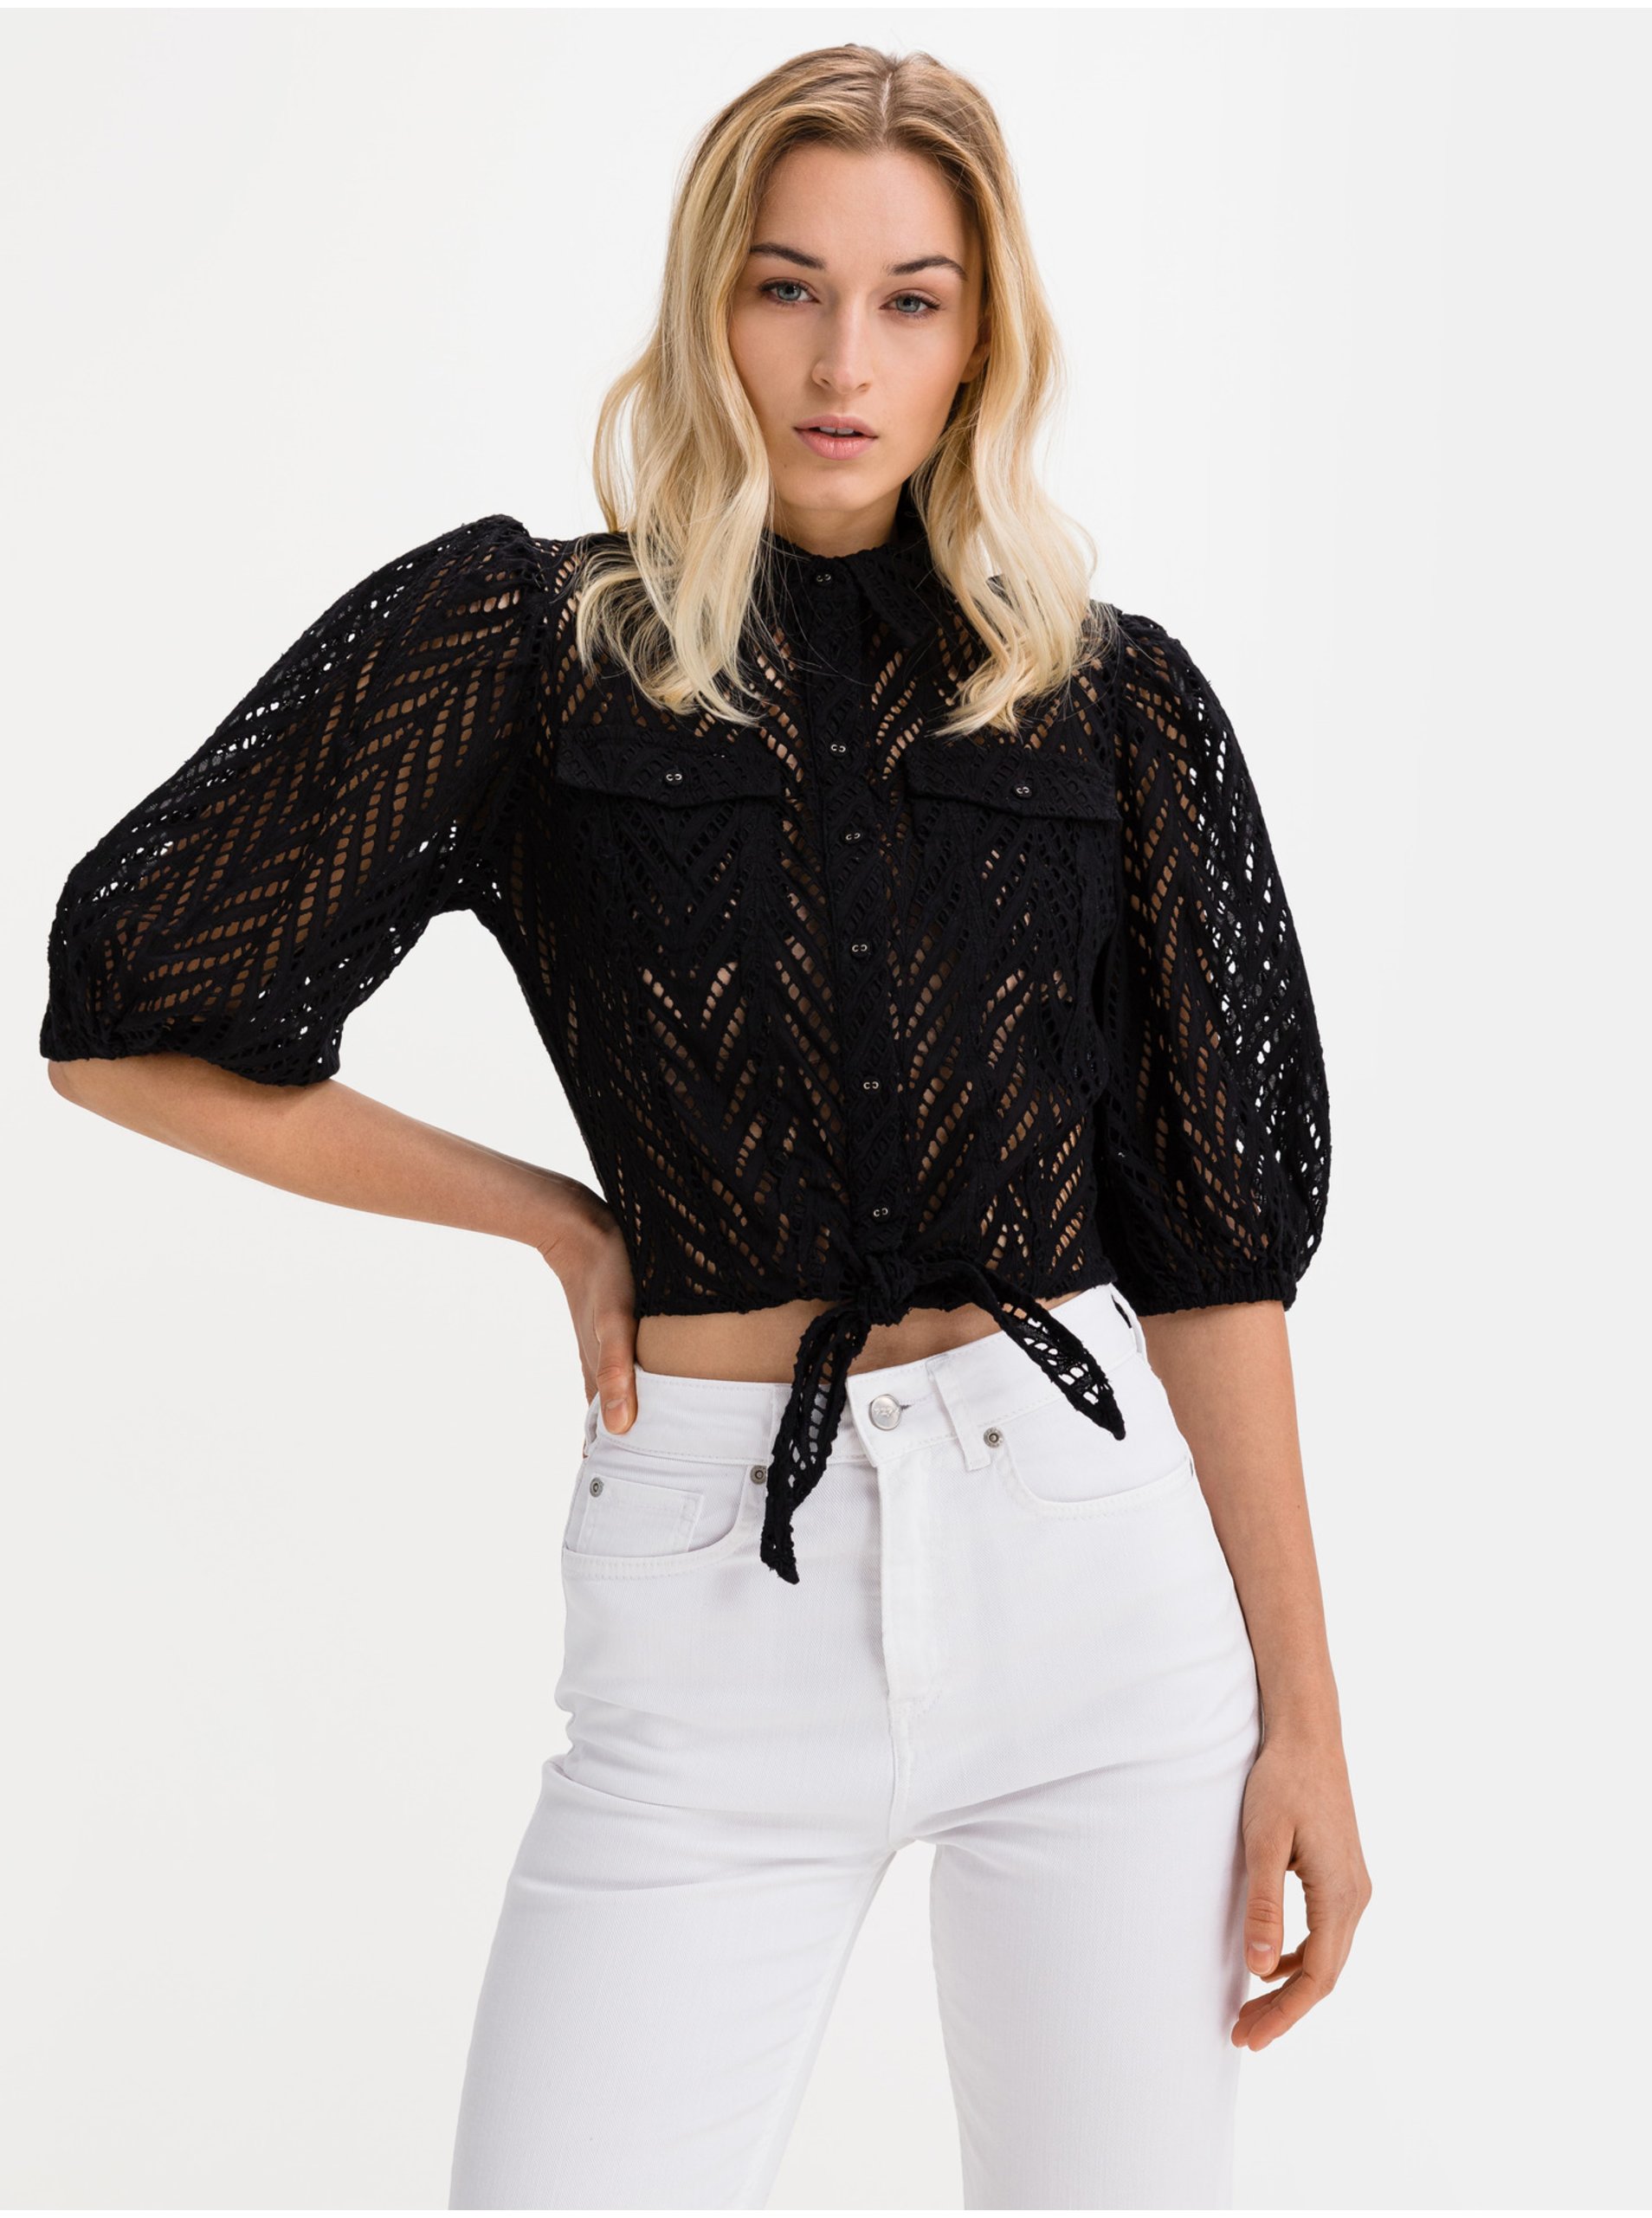 Lacno Phoebe Crop top Guess